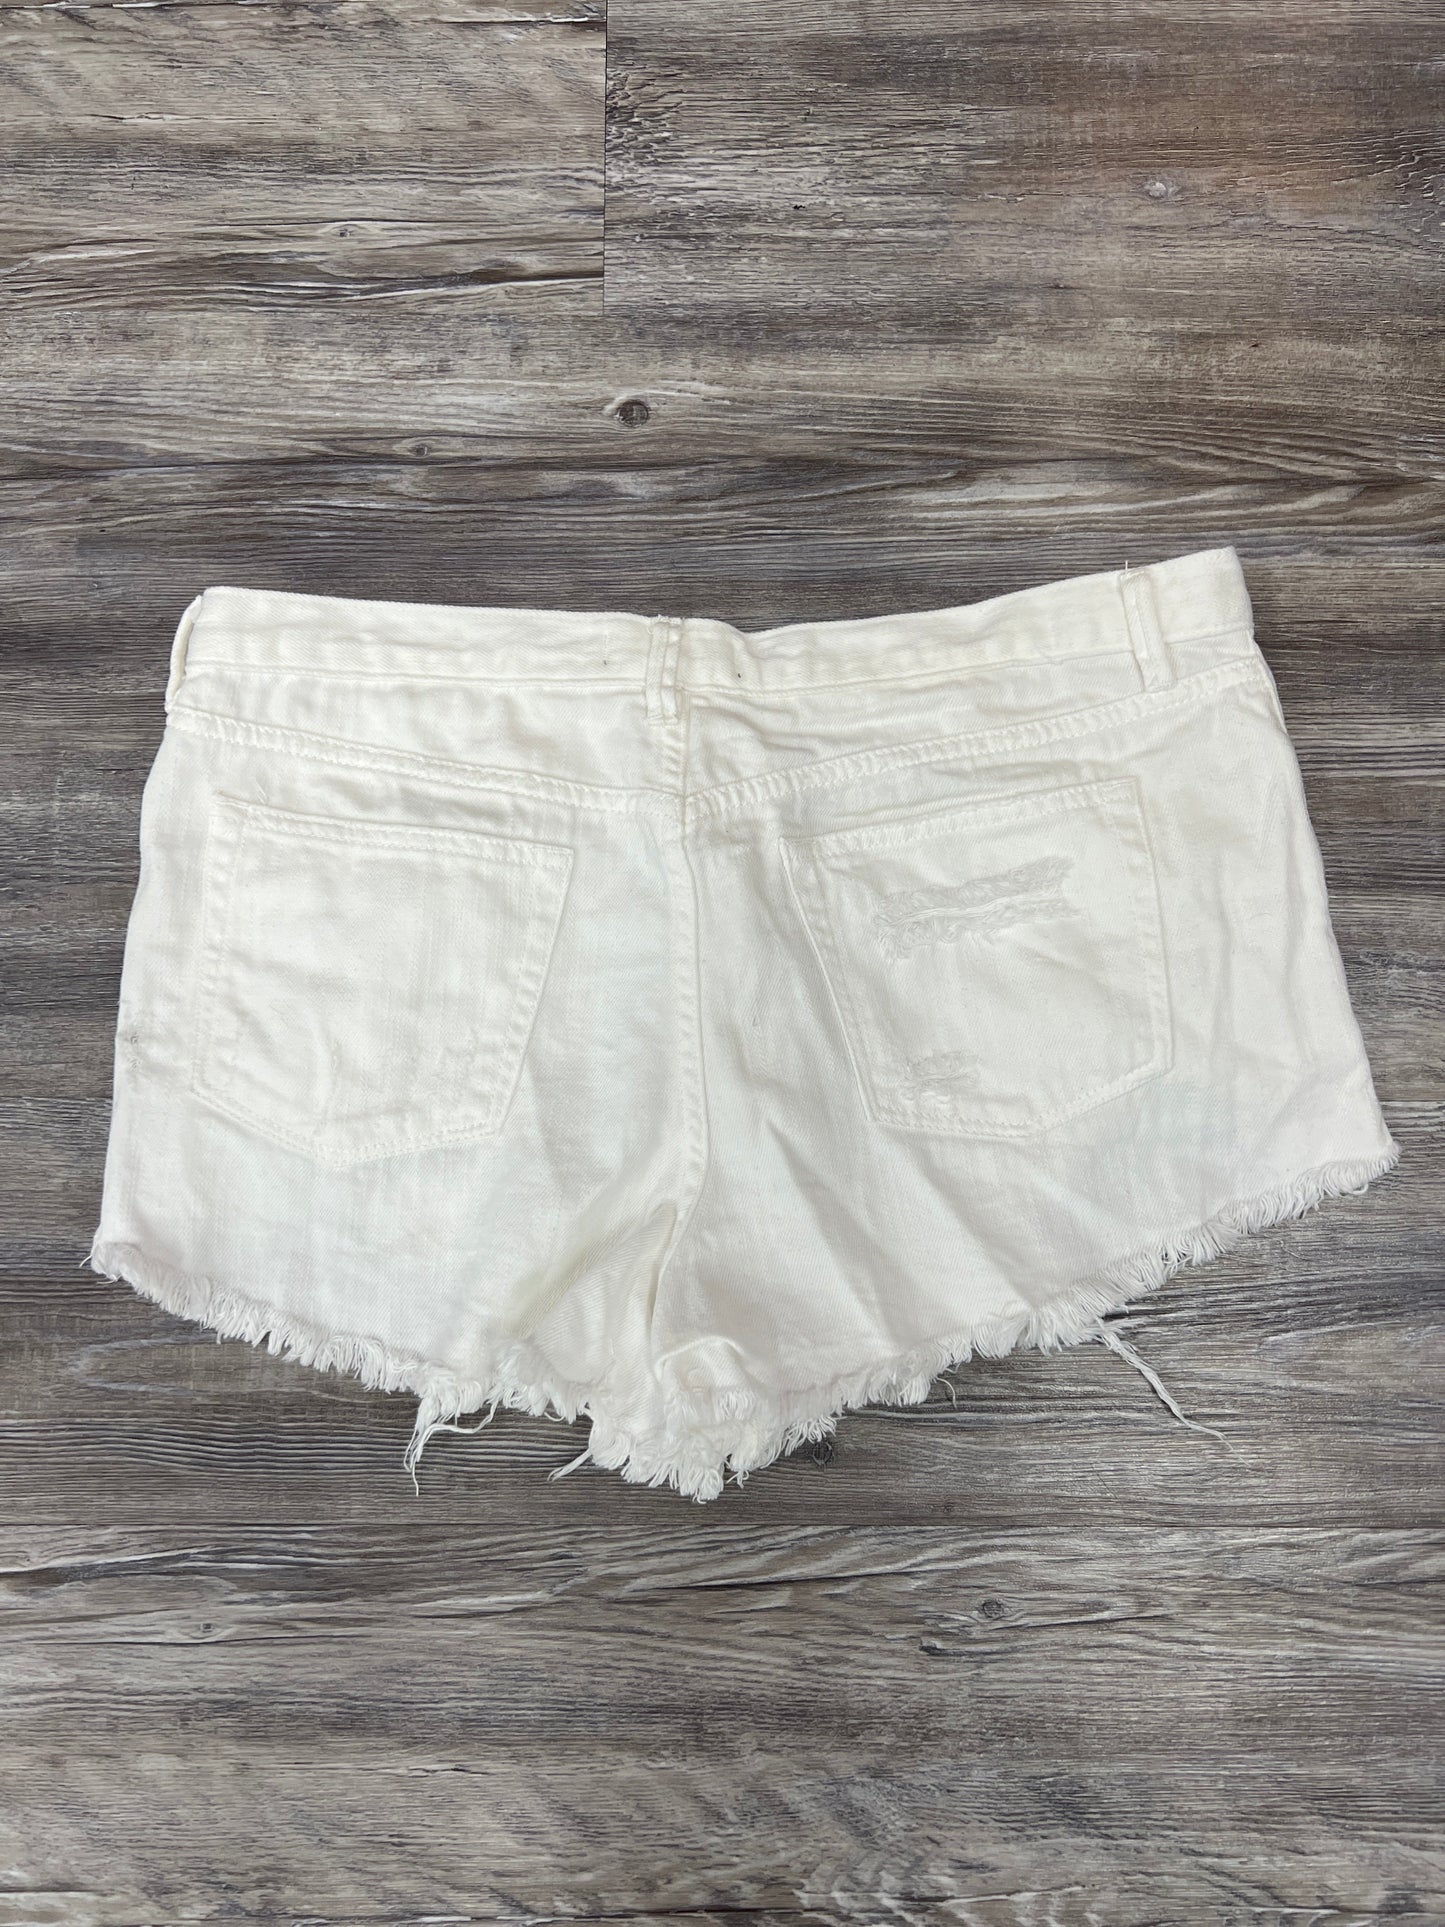 Shorts By We The Free  Size: 14